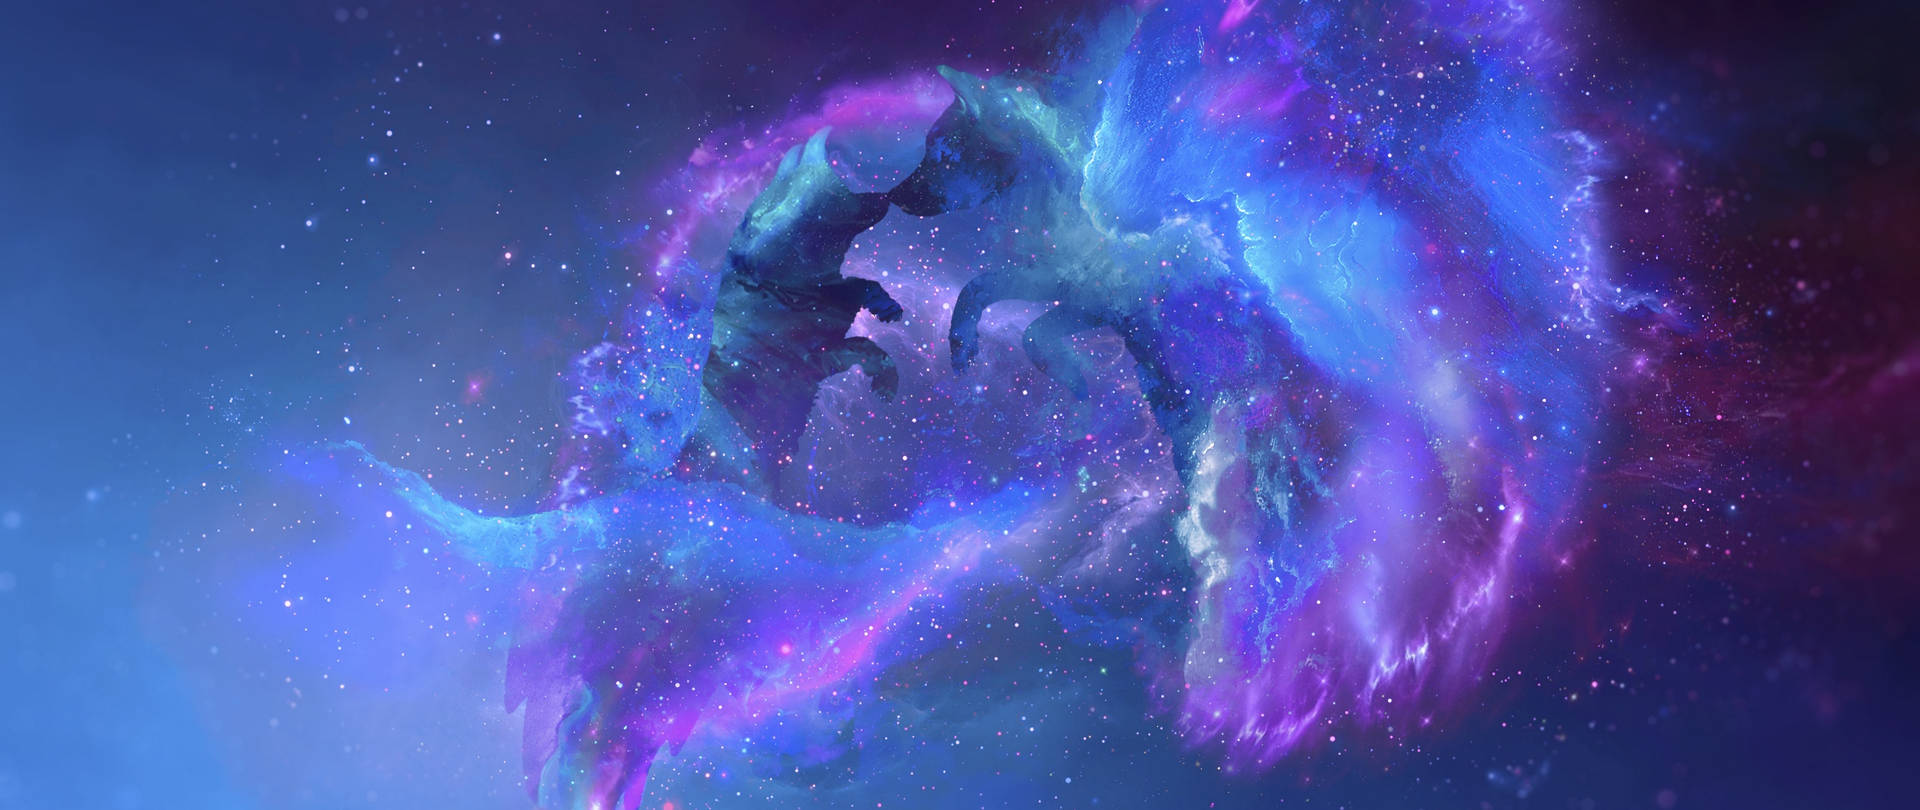 Galaxy Wolf Starry Silhouettes Background